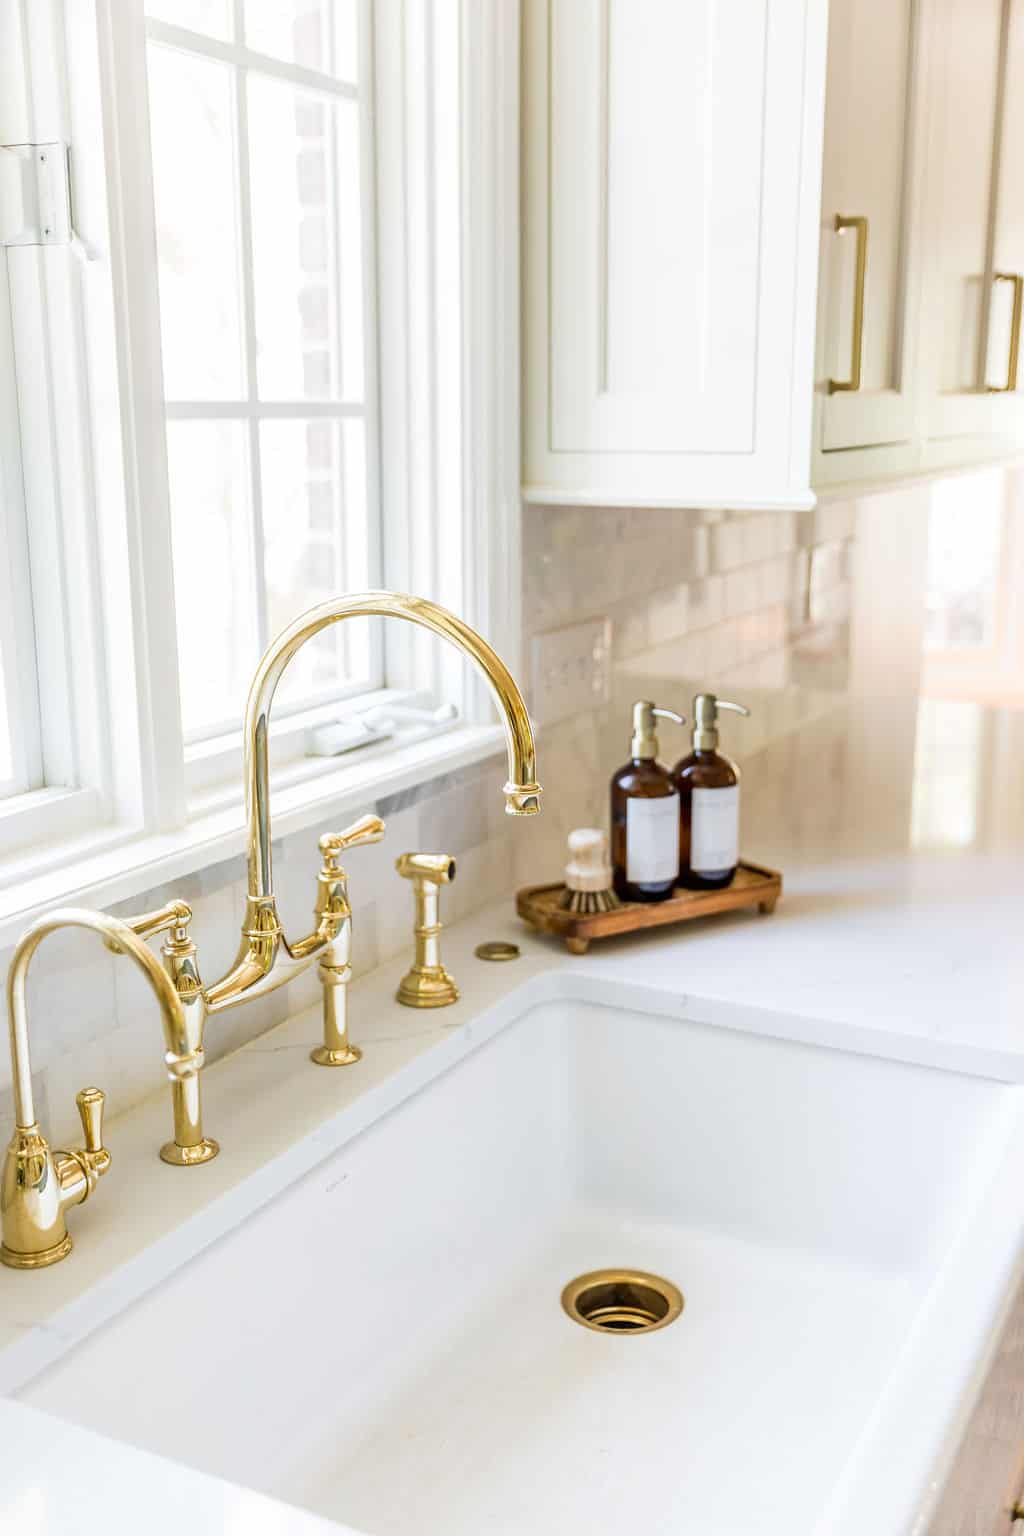 Nicholas Design Build | A white kitchen with brass faucets and a window, perfect for a remodel.